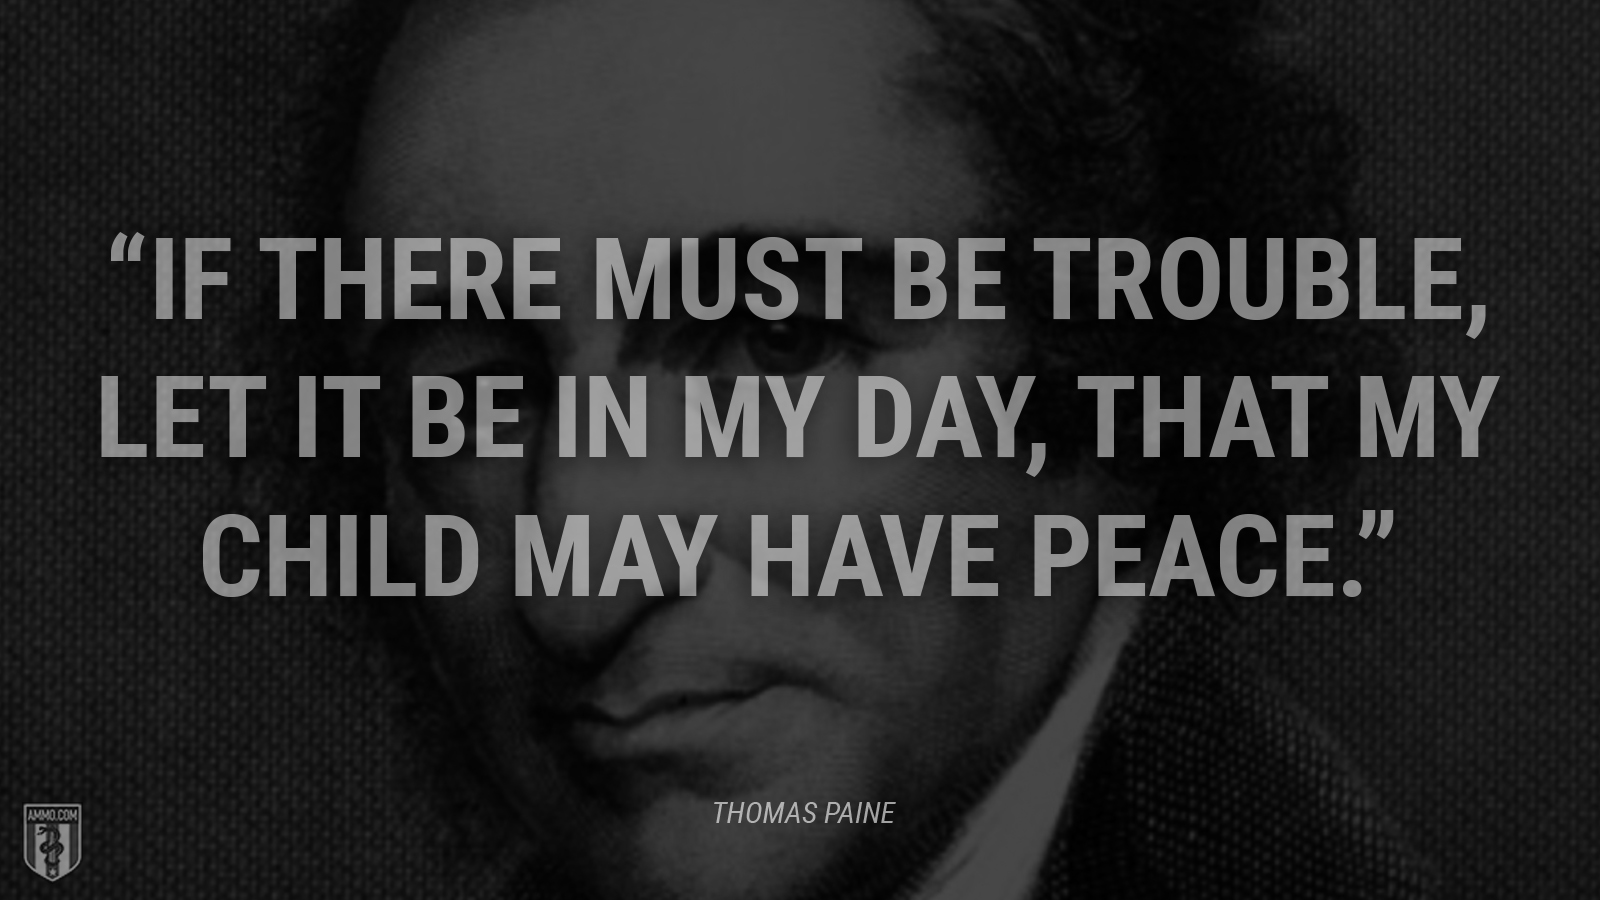 “If there must be trouble, let it be in my day, that my child may have peace.” - Thomas Paine